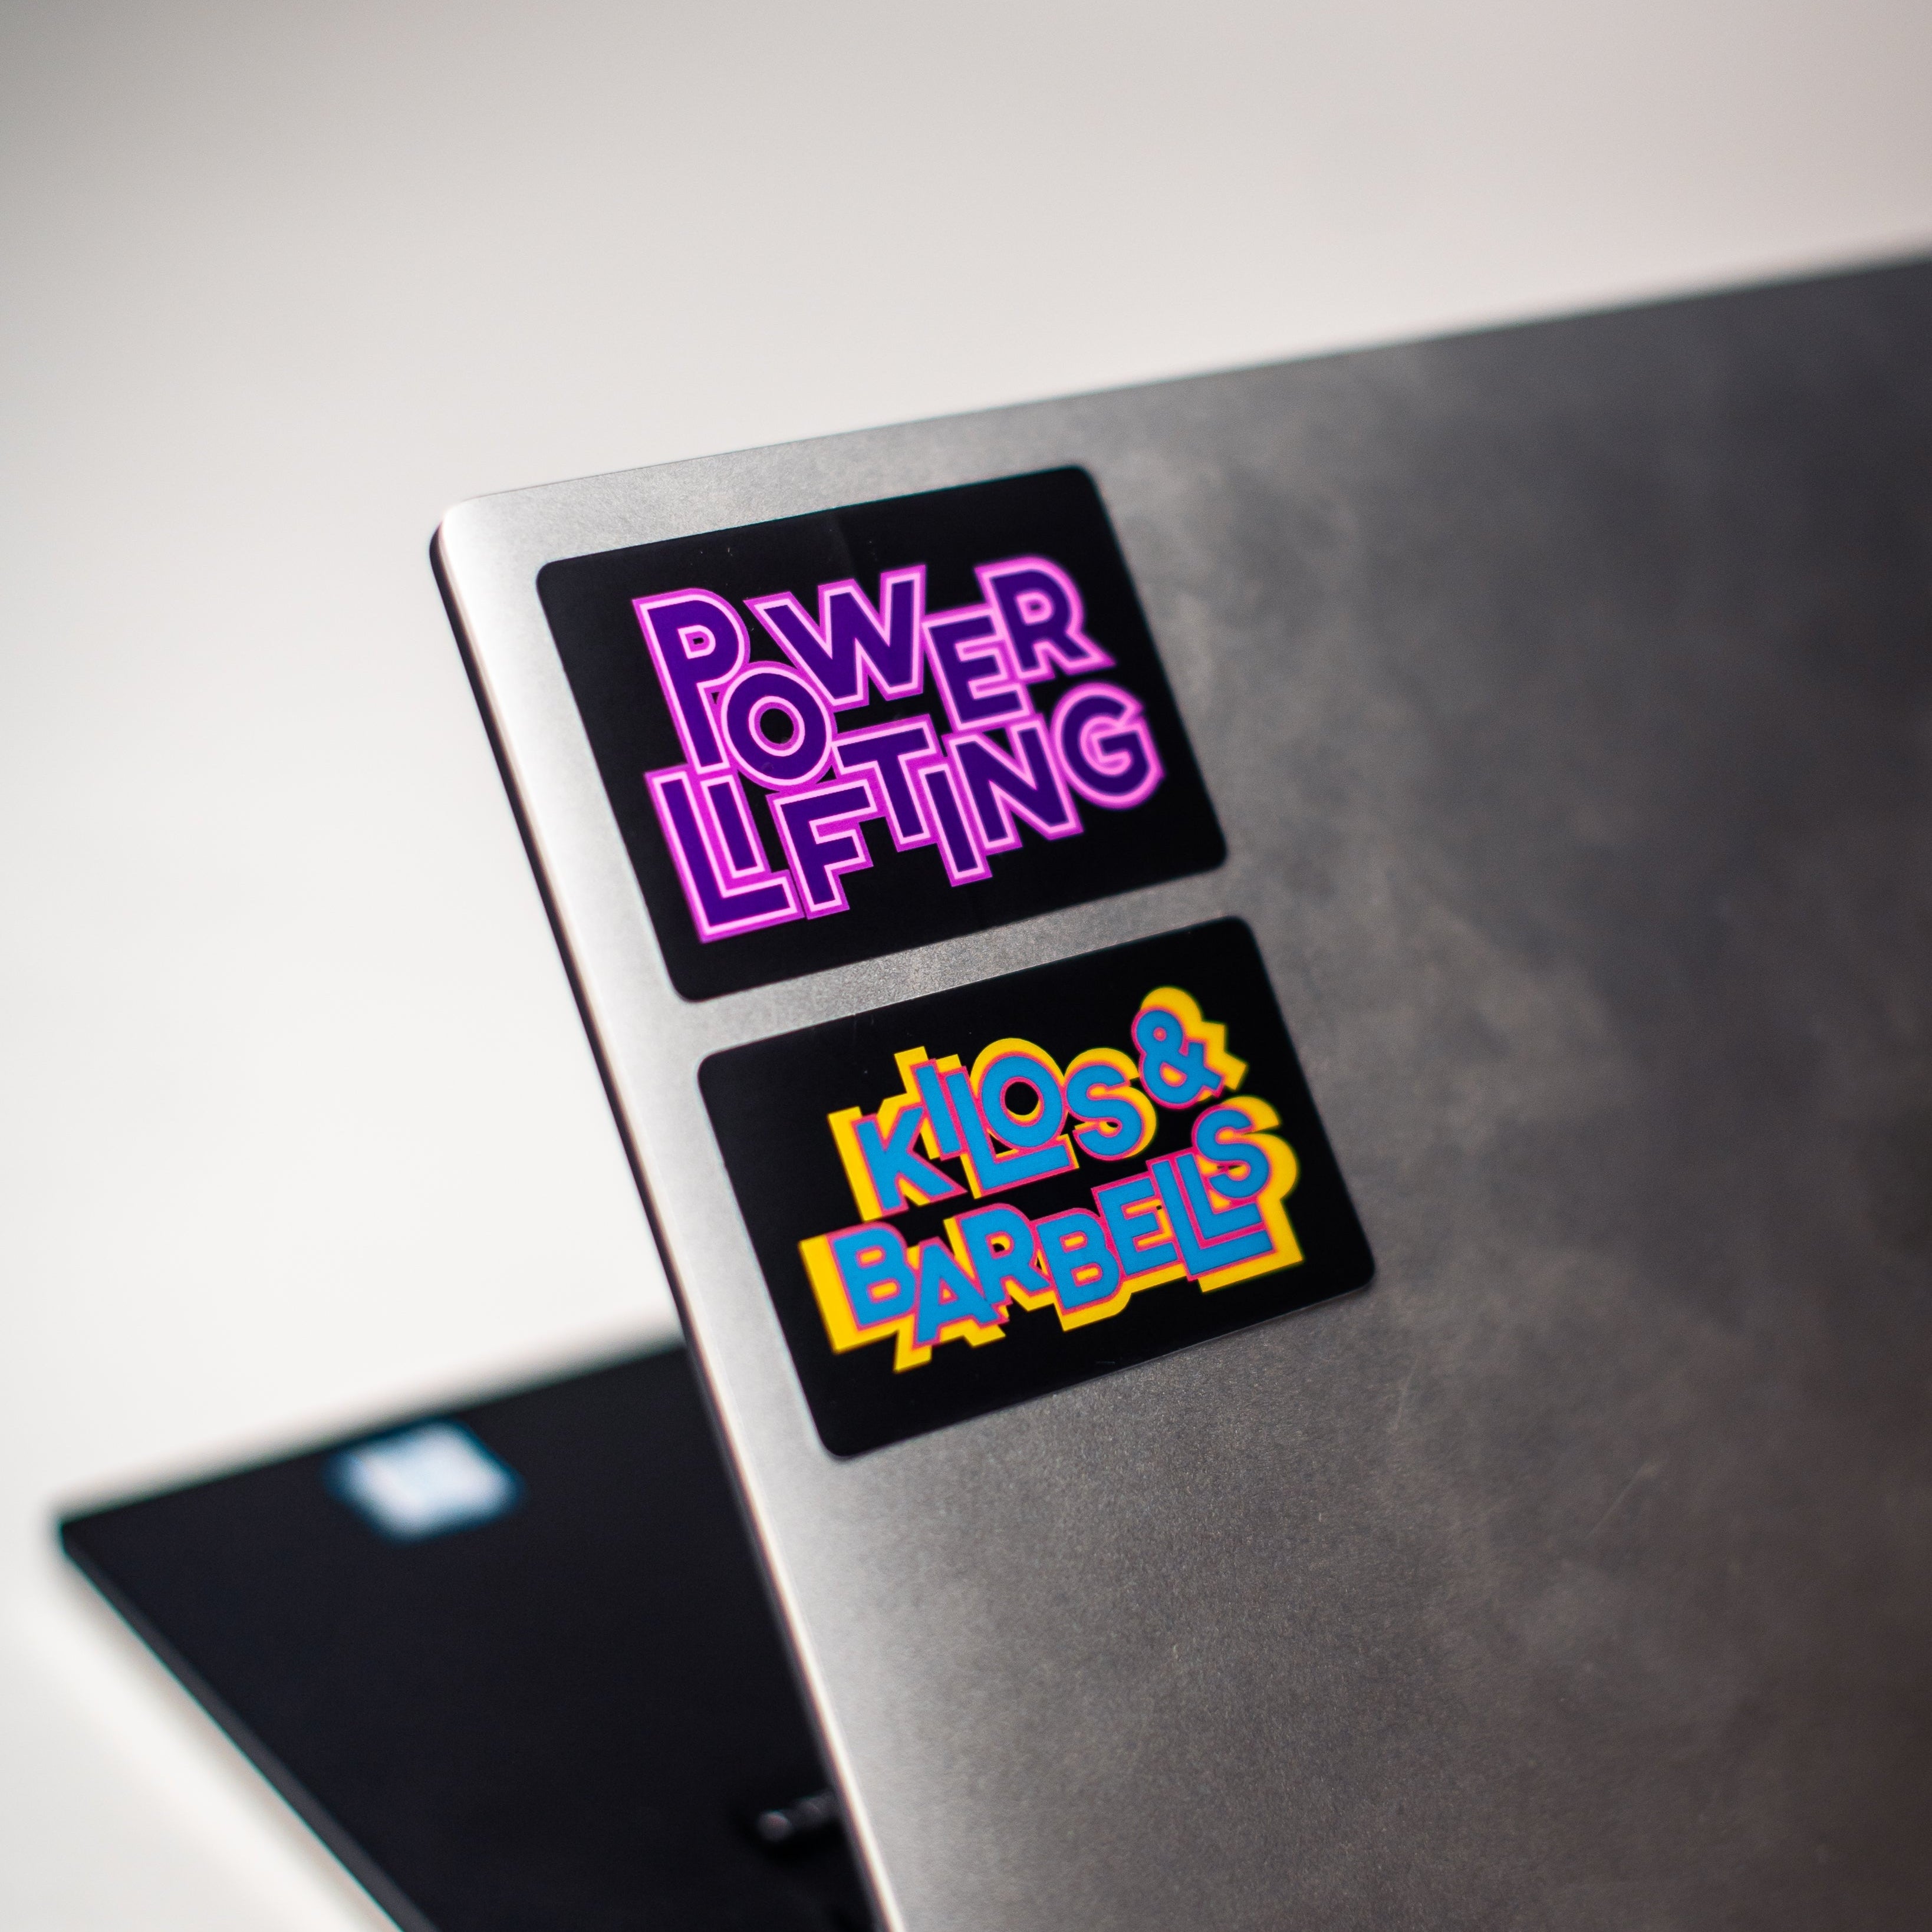 A7 Kilos and Barbells Overtone Sticker combines the dark with the fun and colourful designs to bring that pop of colour into the daily workouts. The sticker dye-cut, made from durable polypropylene and is 3 in wide x 2 in high. Purchase Kilos and Barbells Overtone Sticker from A7 UK.